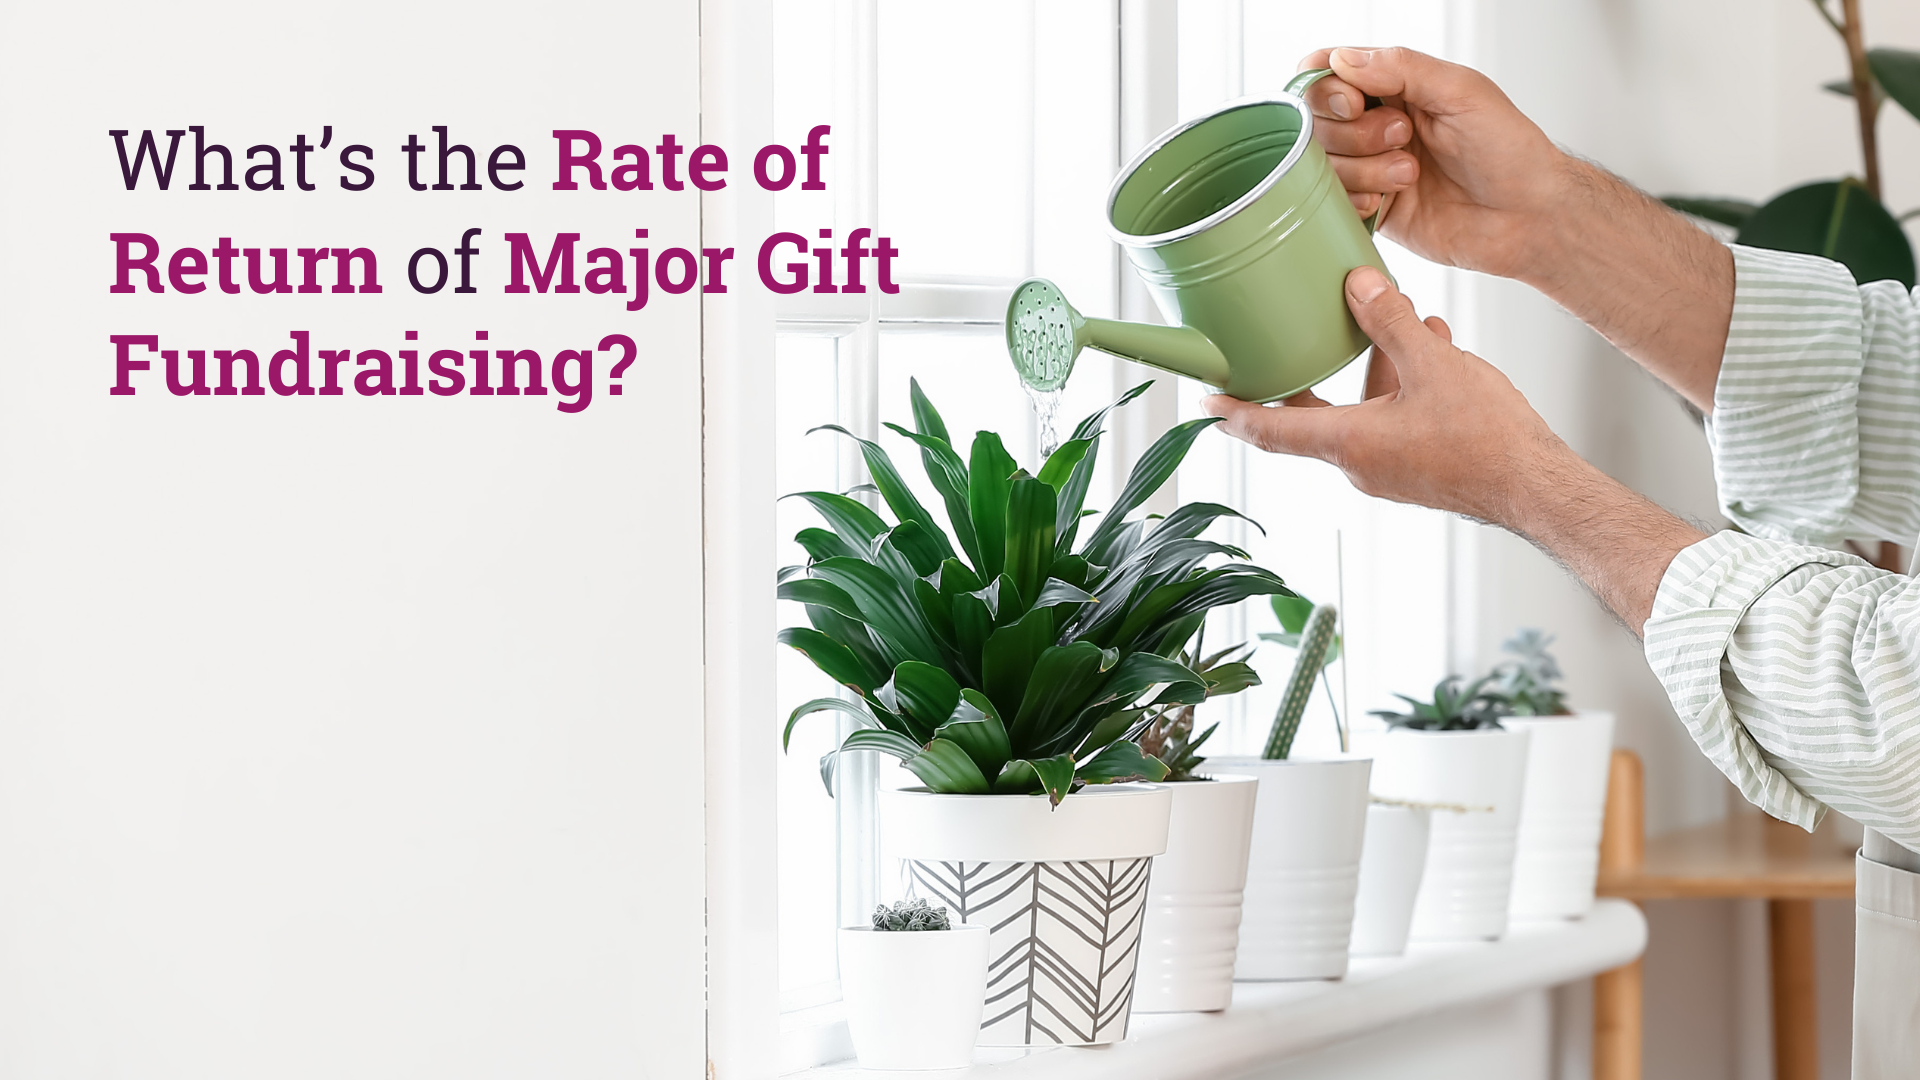 fundraising rate of return, fundraising roi, fundraising return on investment, rate of return of major gifts